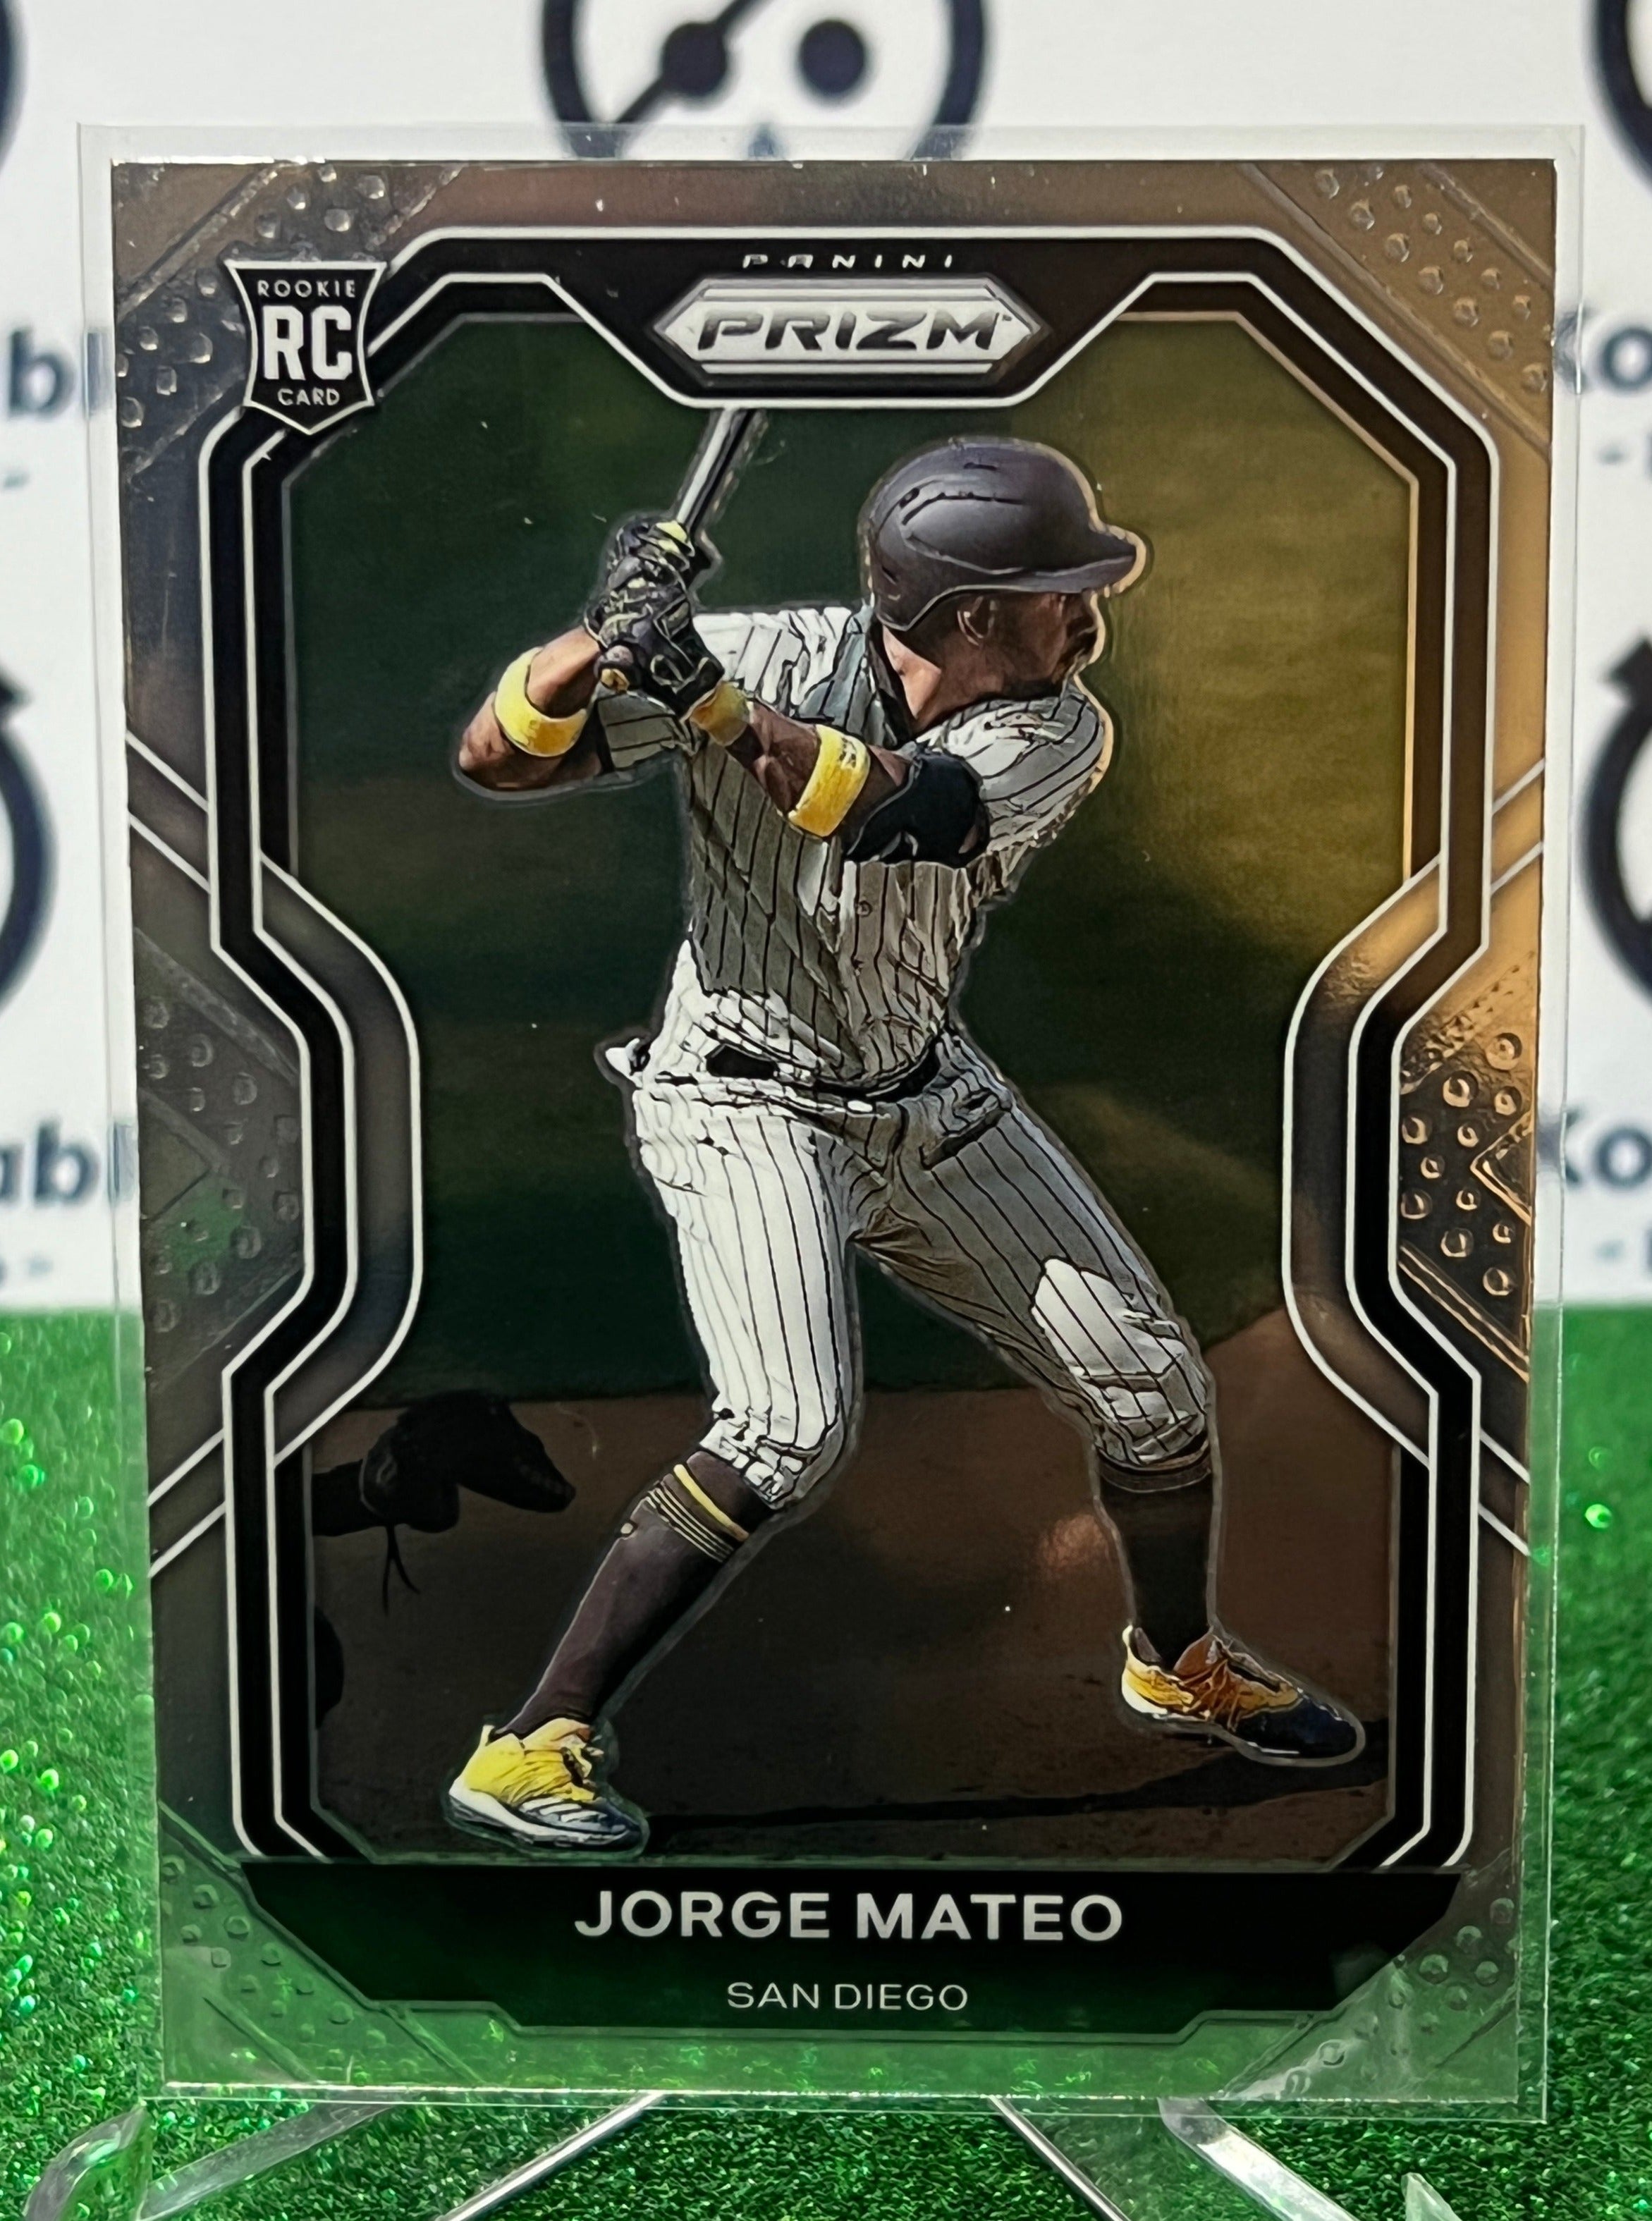 Jorge Mateo promoted by Padres